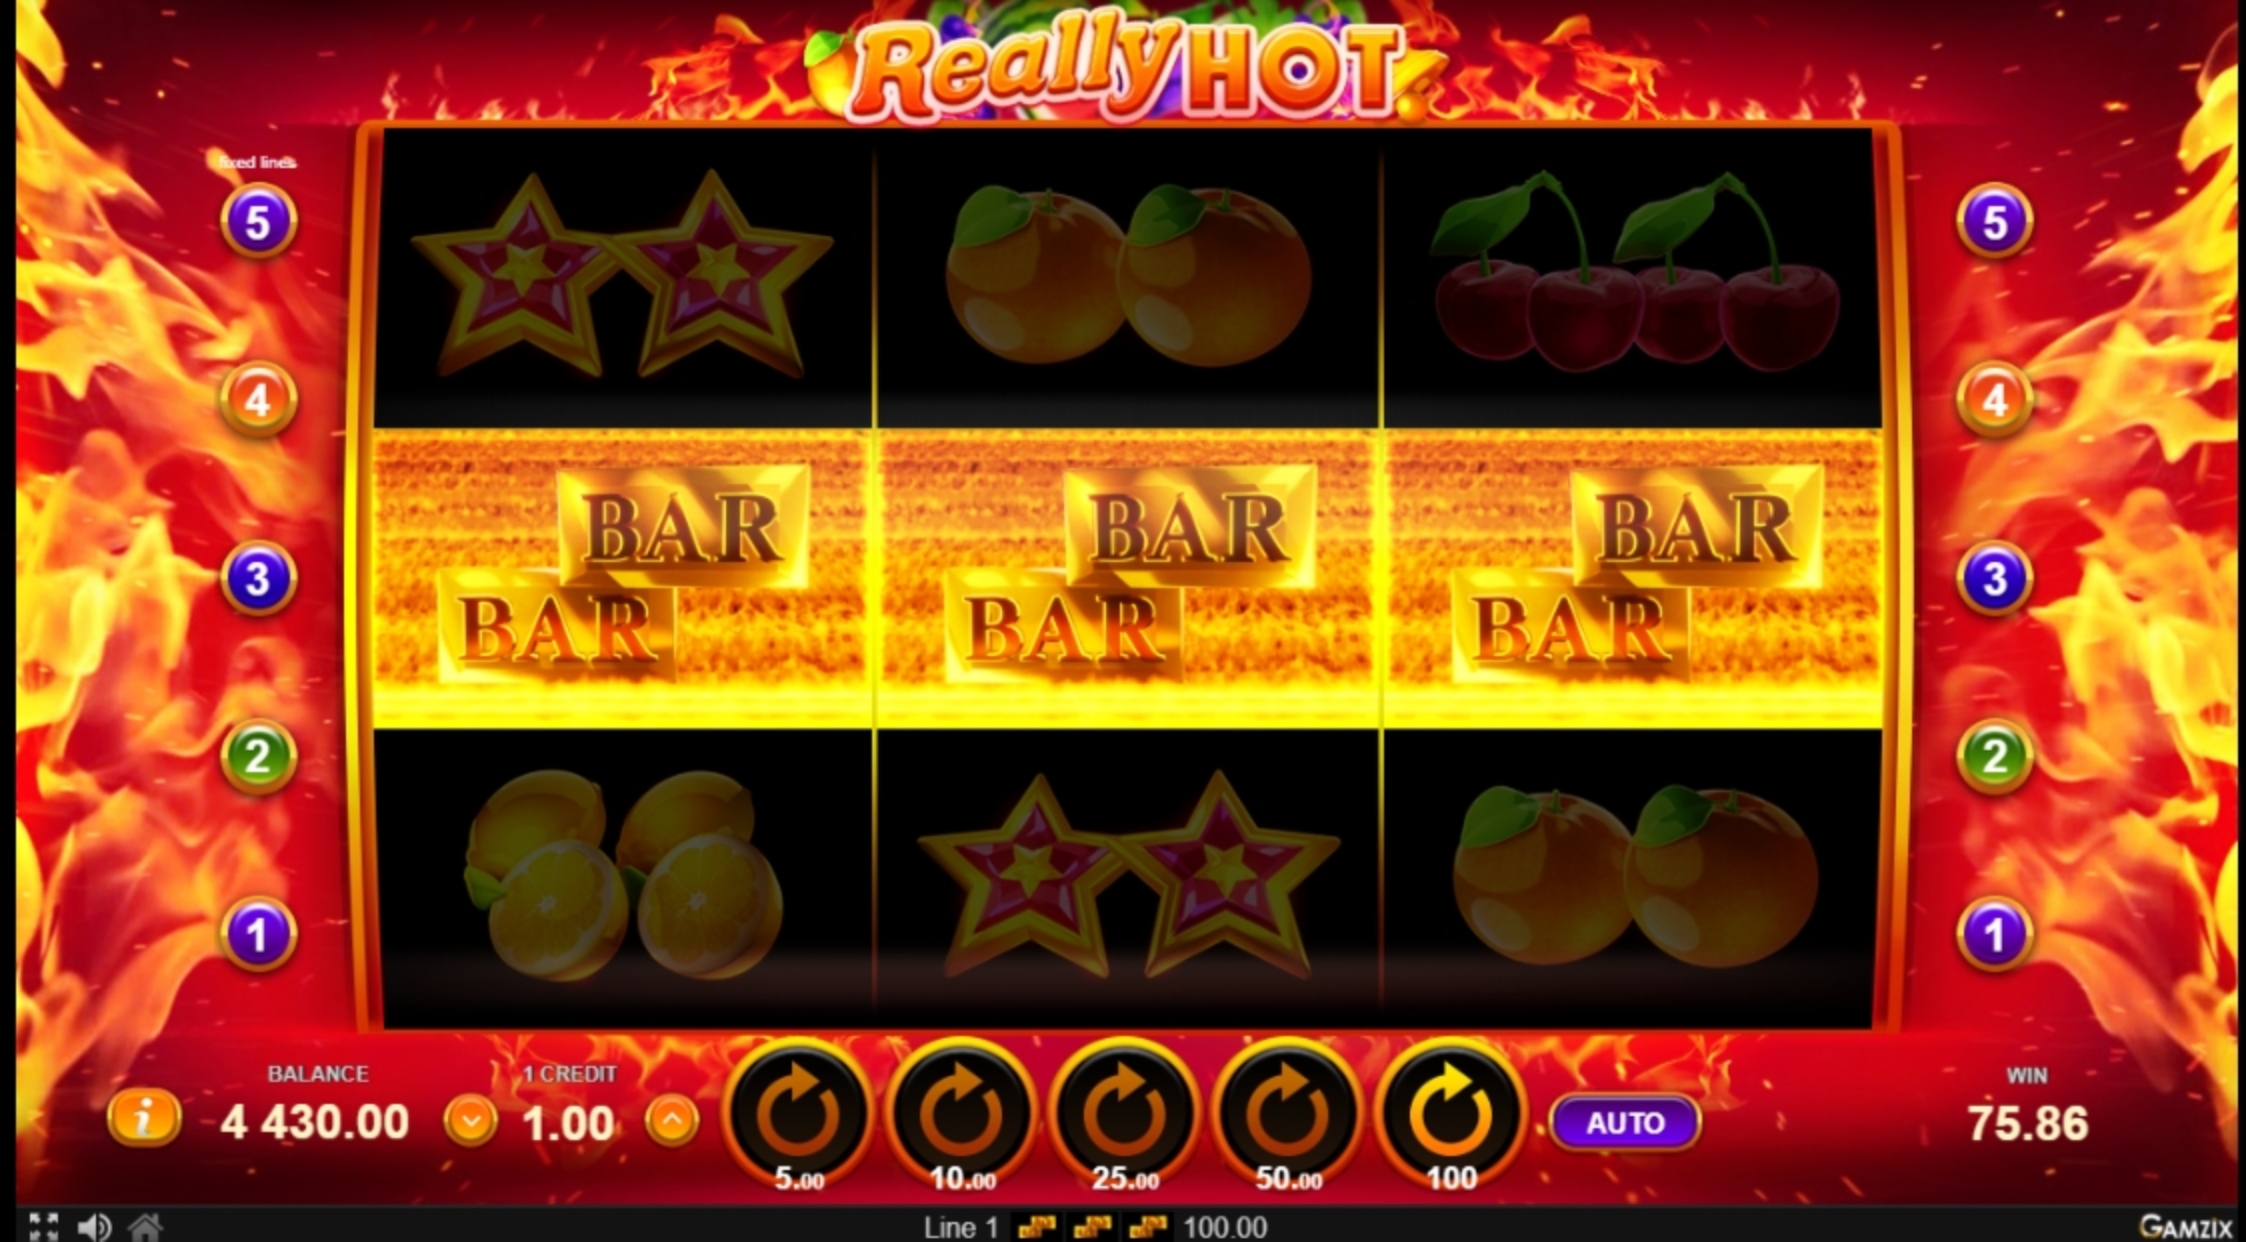 Win Money in Really Hot Free Slot Game by Gamzix